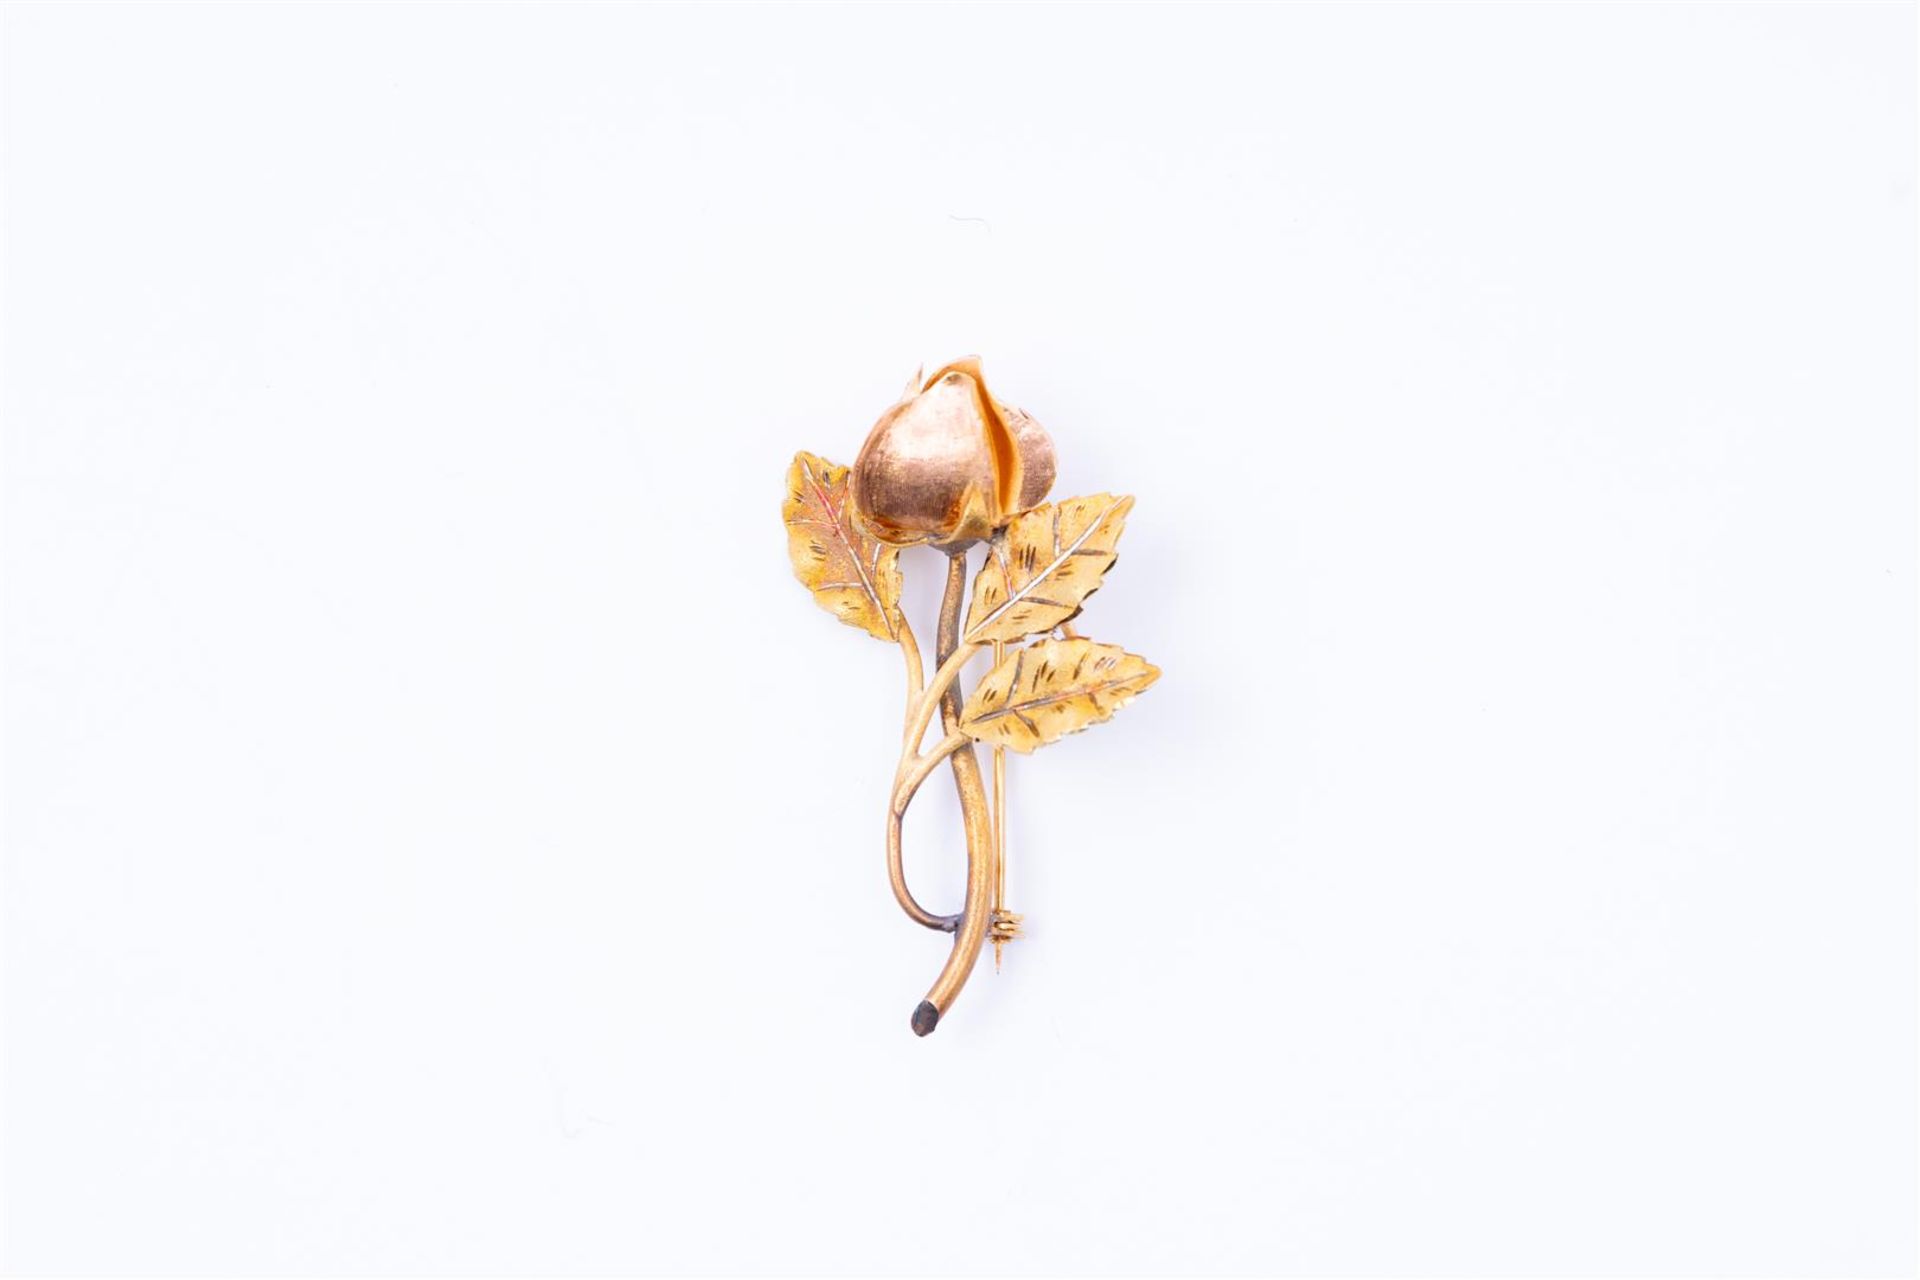 14kt Bicolor gold brooch in the shape of a rose. The bud of the rose is made in rose gold and the le